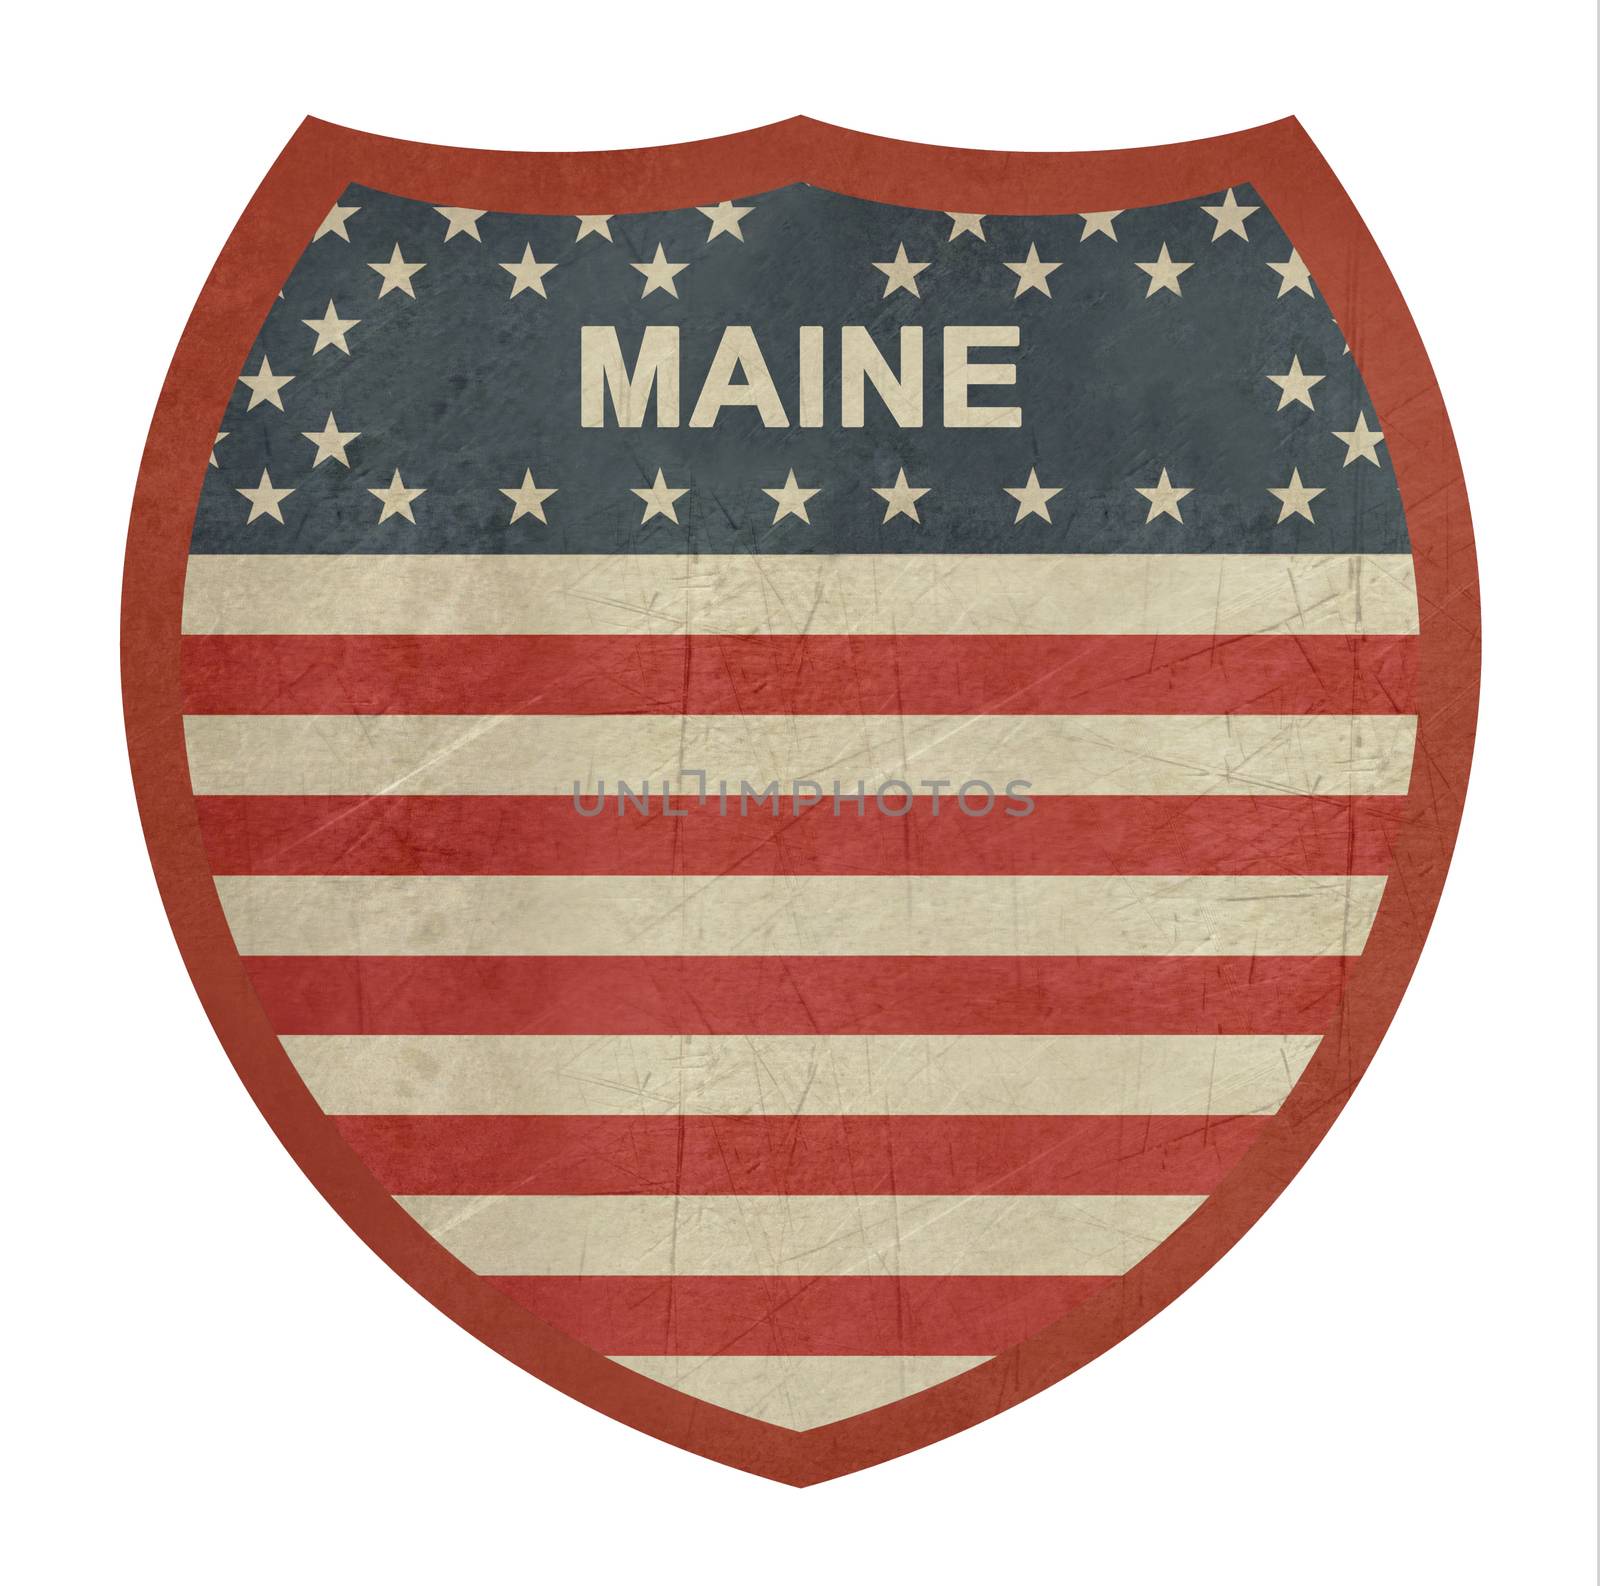 Grunge Maine American interstate highway sign isolated on a white background.